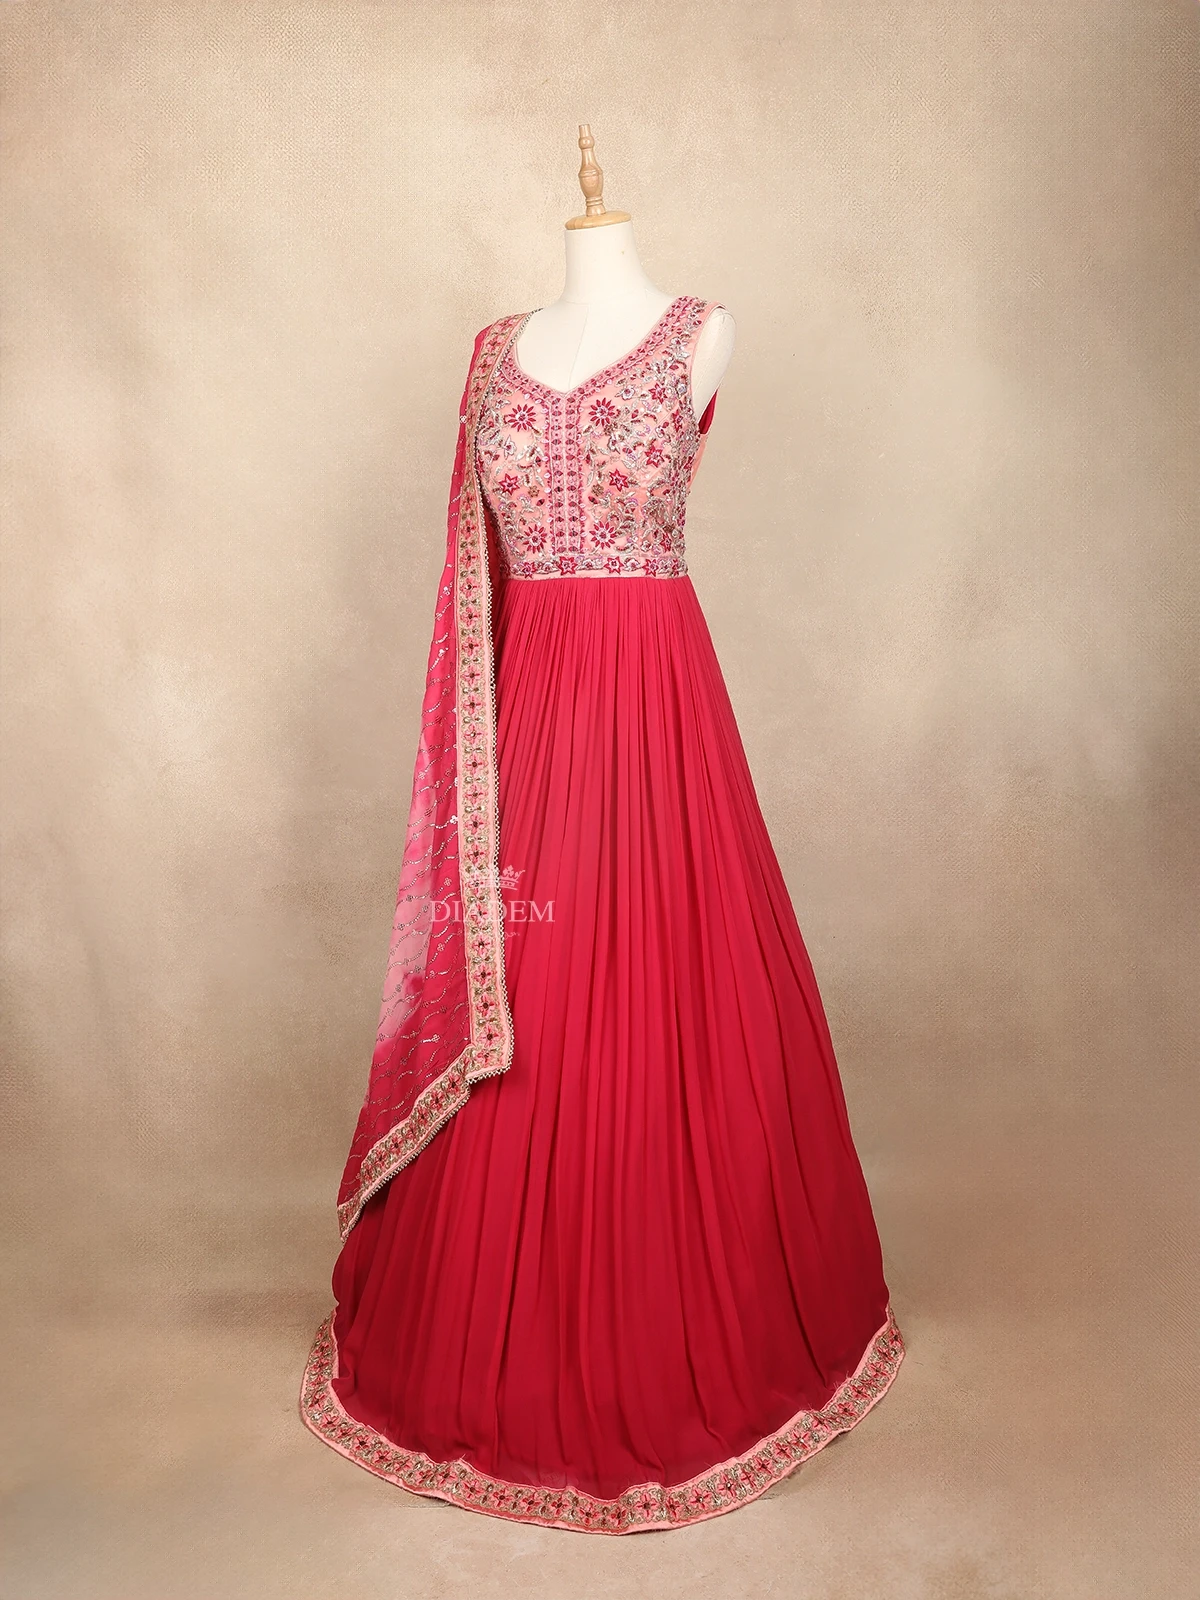 Pink Gown Embellished With Sequins And Embraided Flower Design With Dupatta